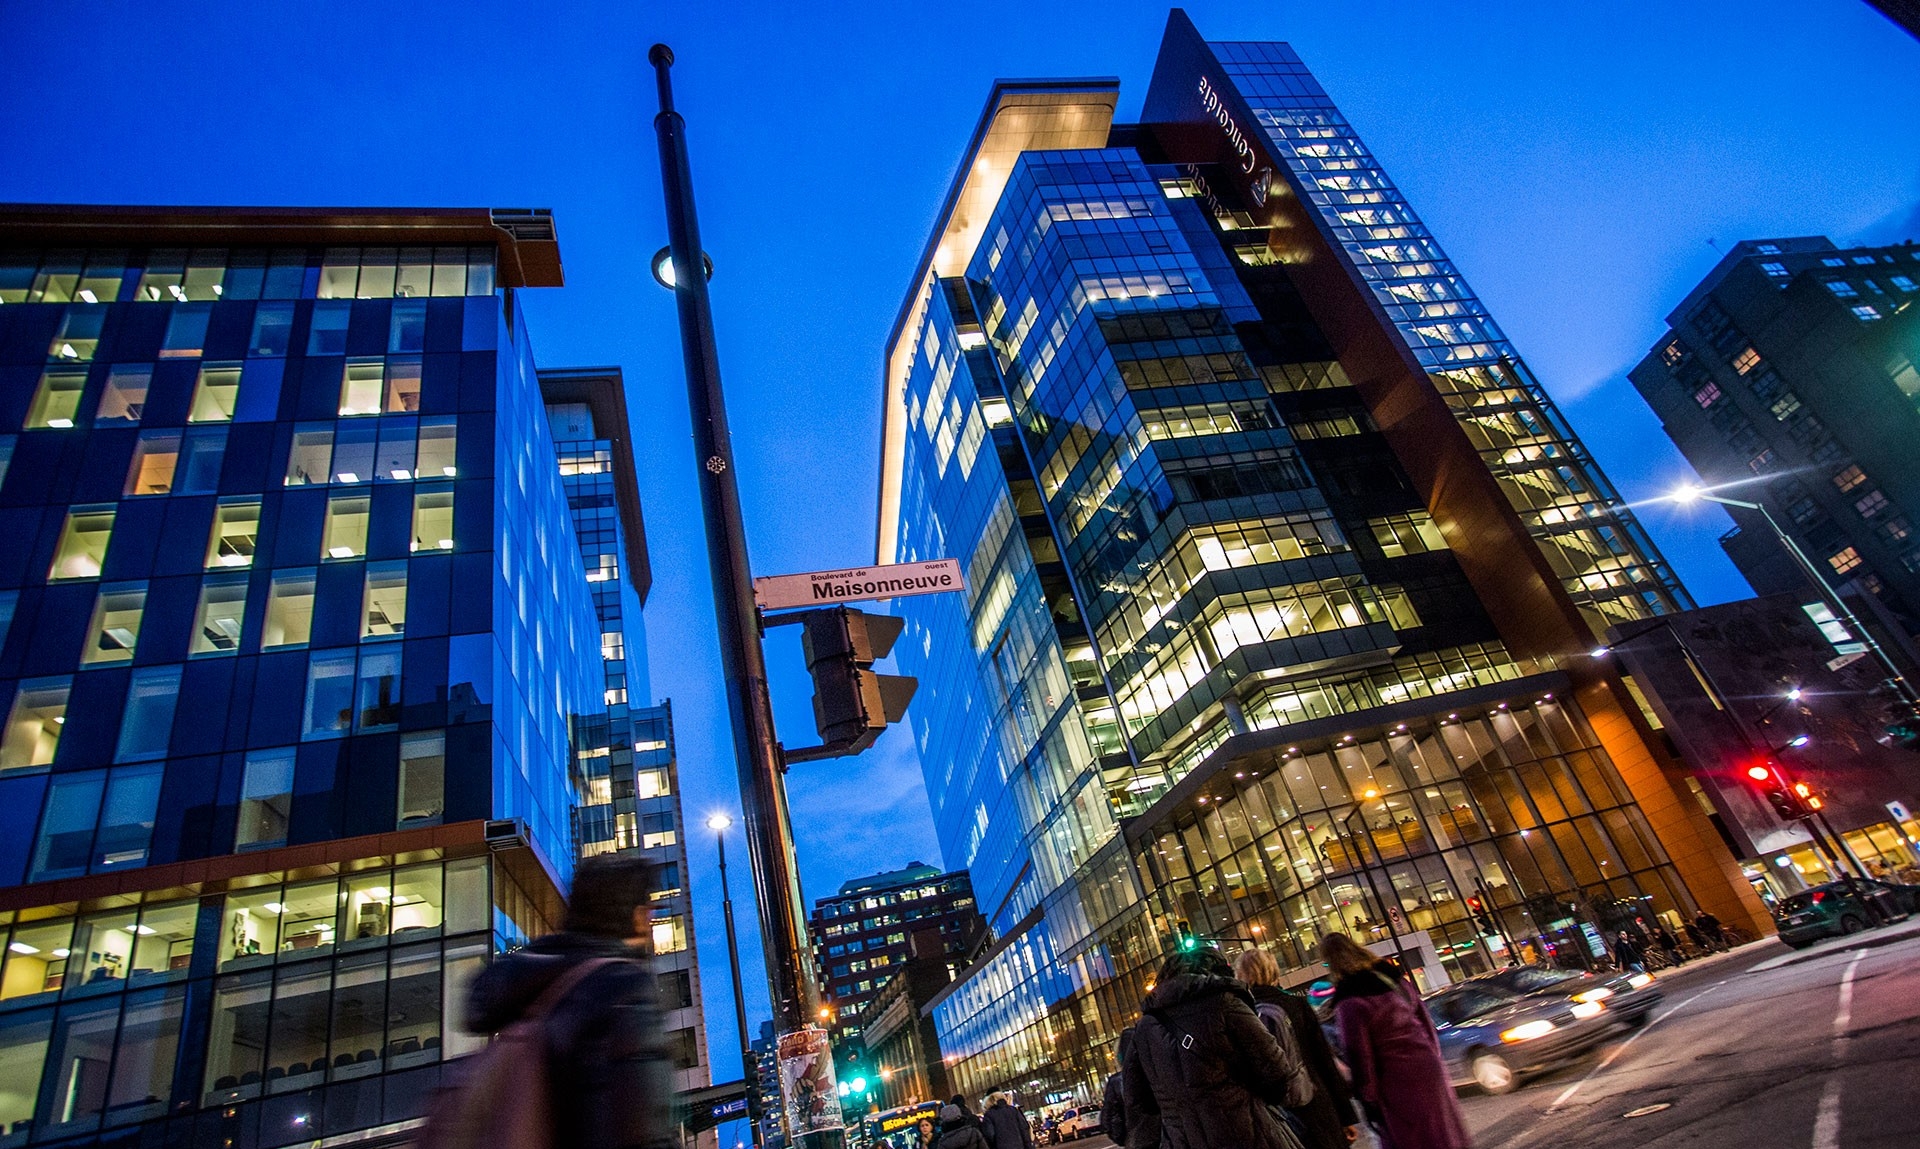 Concordia downtown campus showing tall buildings lit at night with pedestrians on the street